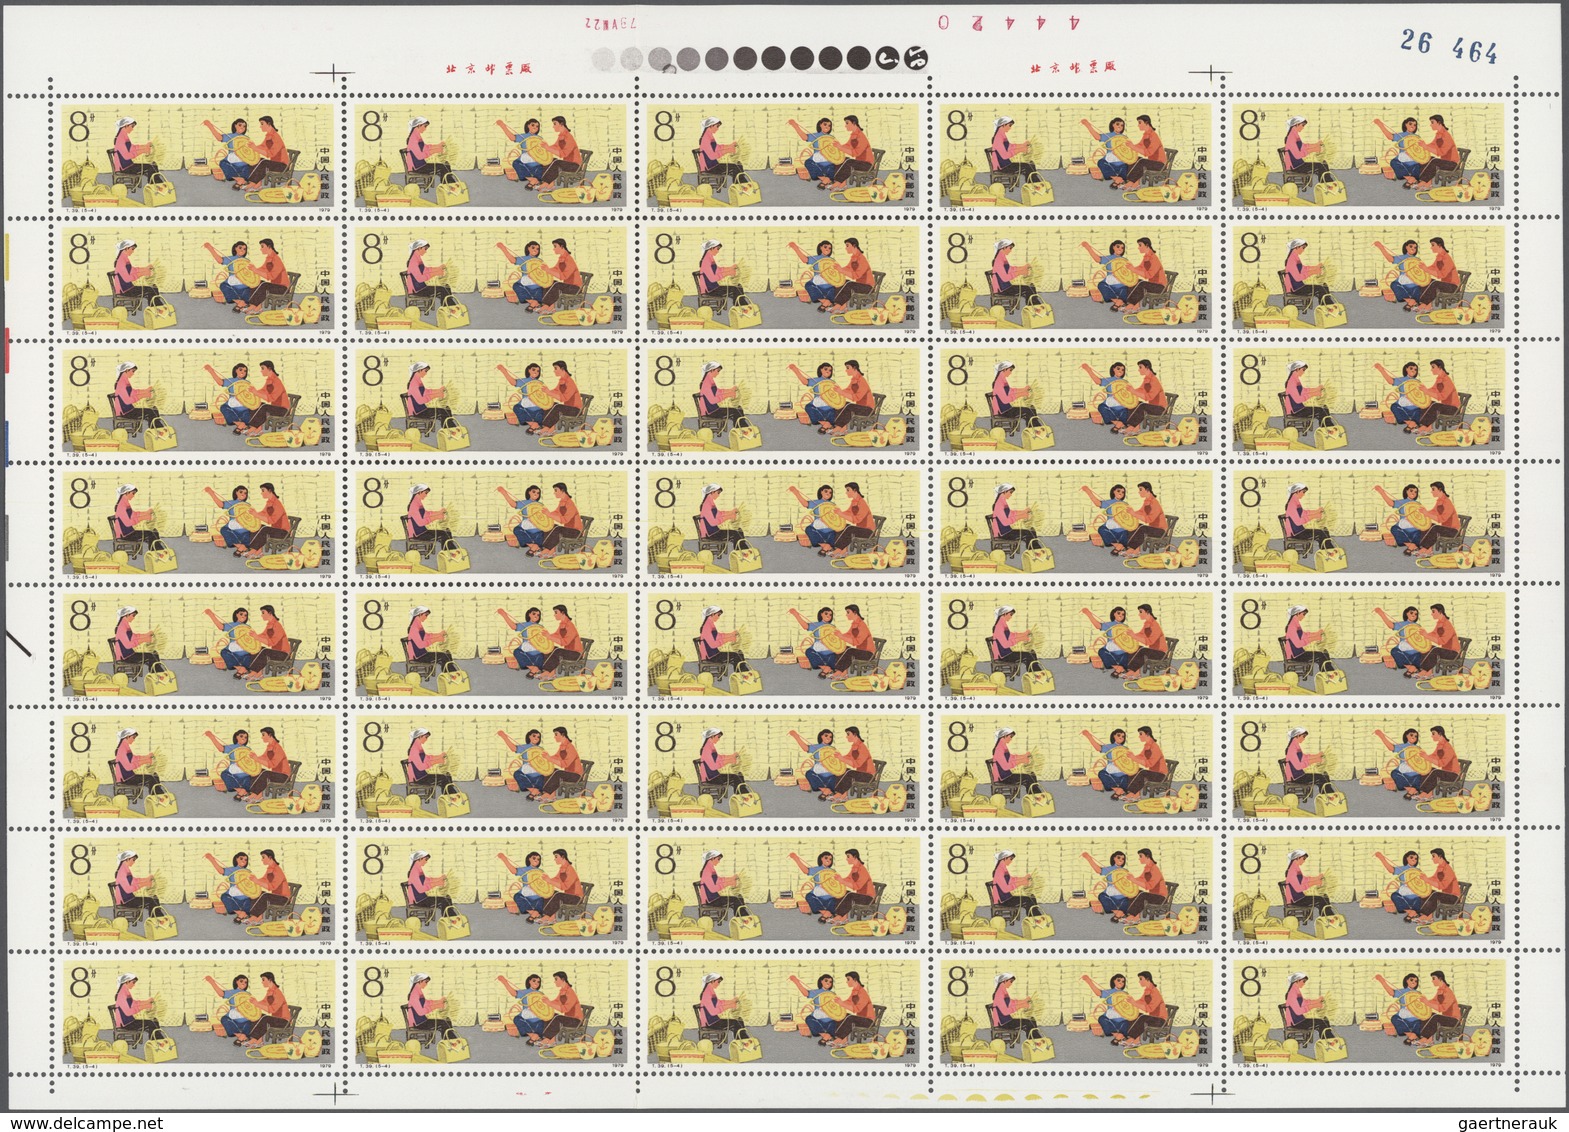 China - Volksrepublik: 1979, Trades of the People's Communes (T39), 40 complete sets of 5 on full sh